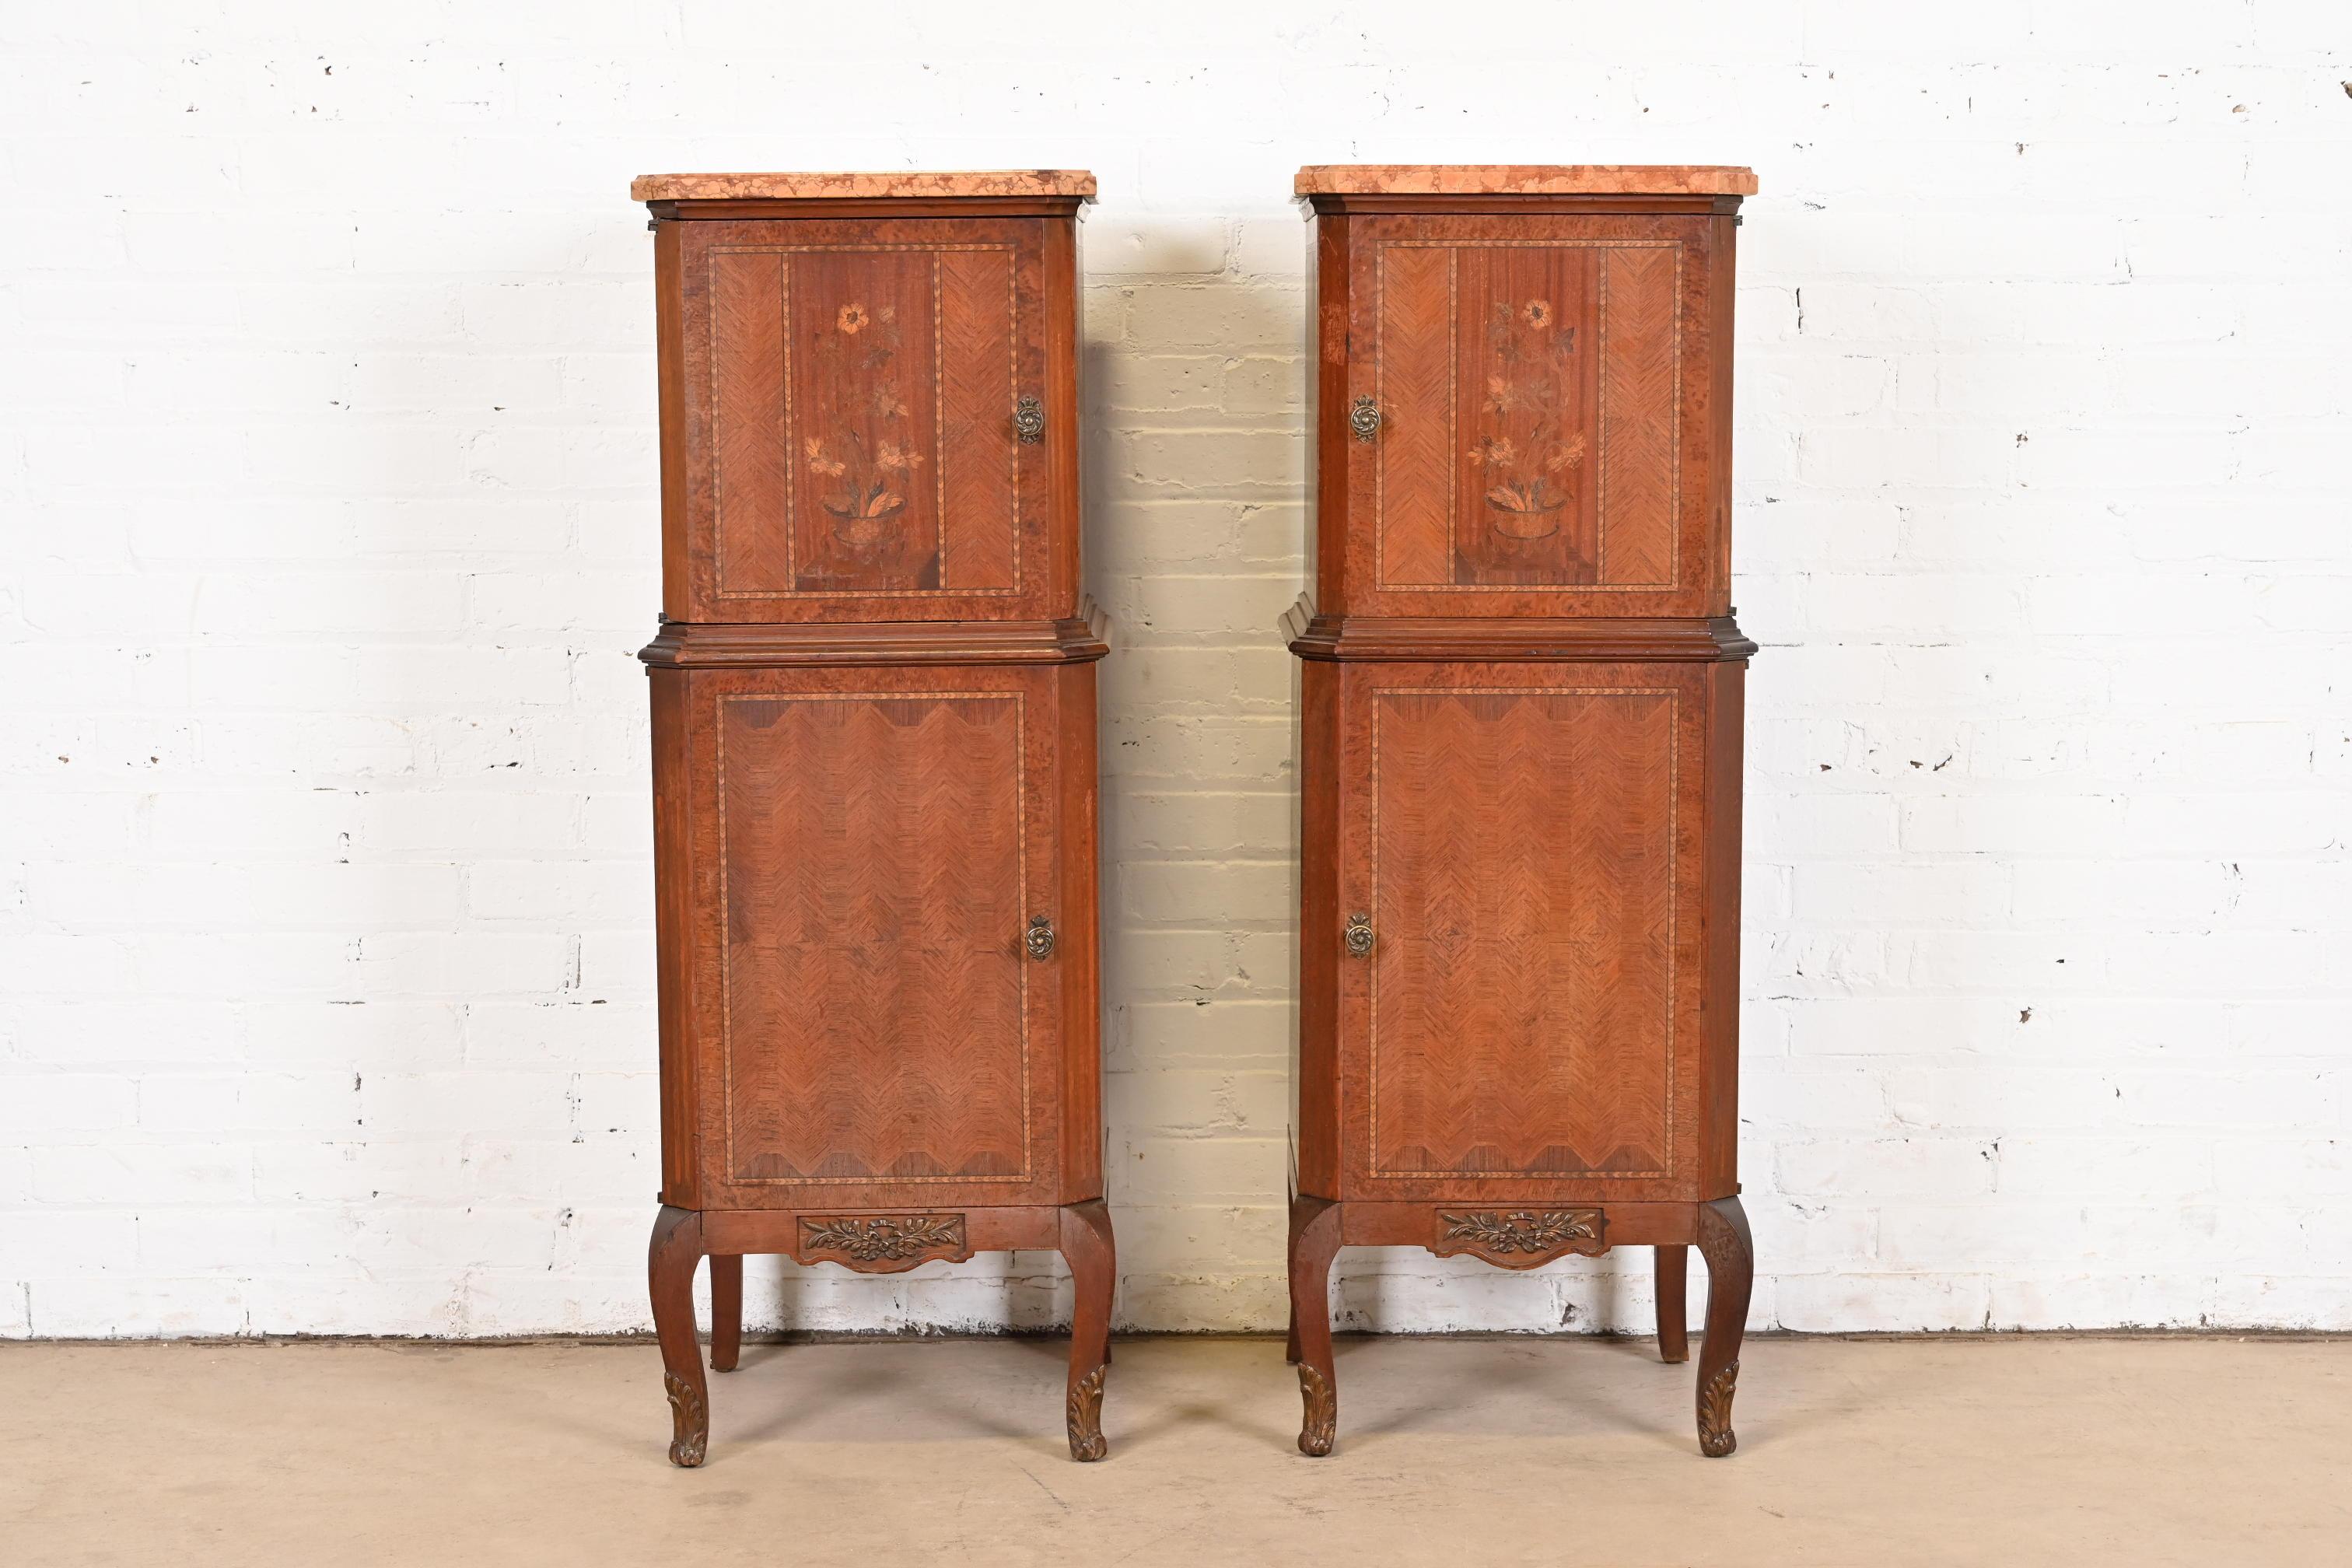 French Louis XV Kingwood Inlaid Marquetry Marble Top Lingerie Chests, Pair In Good Condition For Sale In South Bend, IN